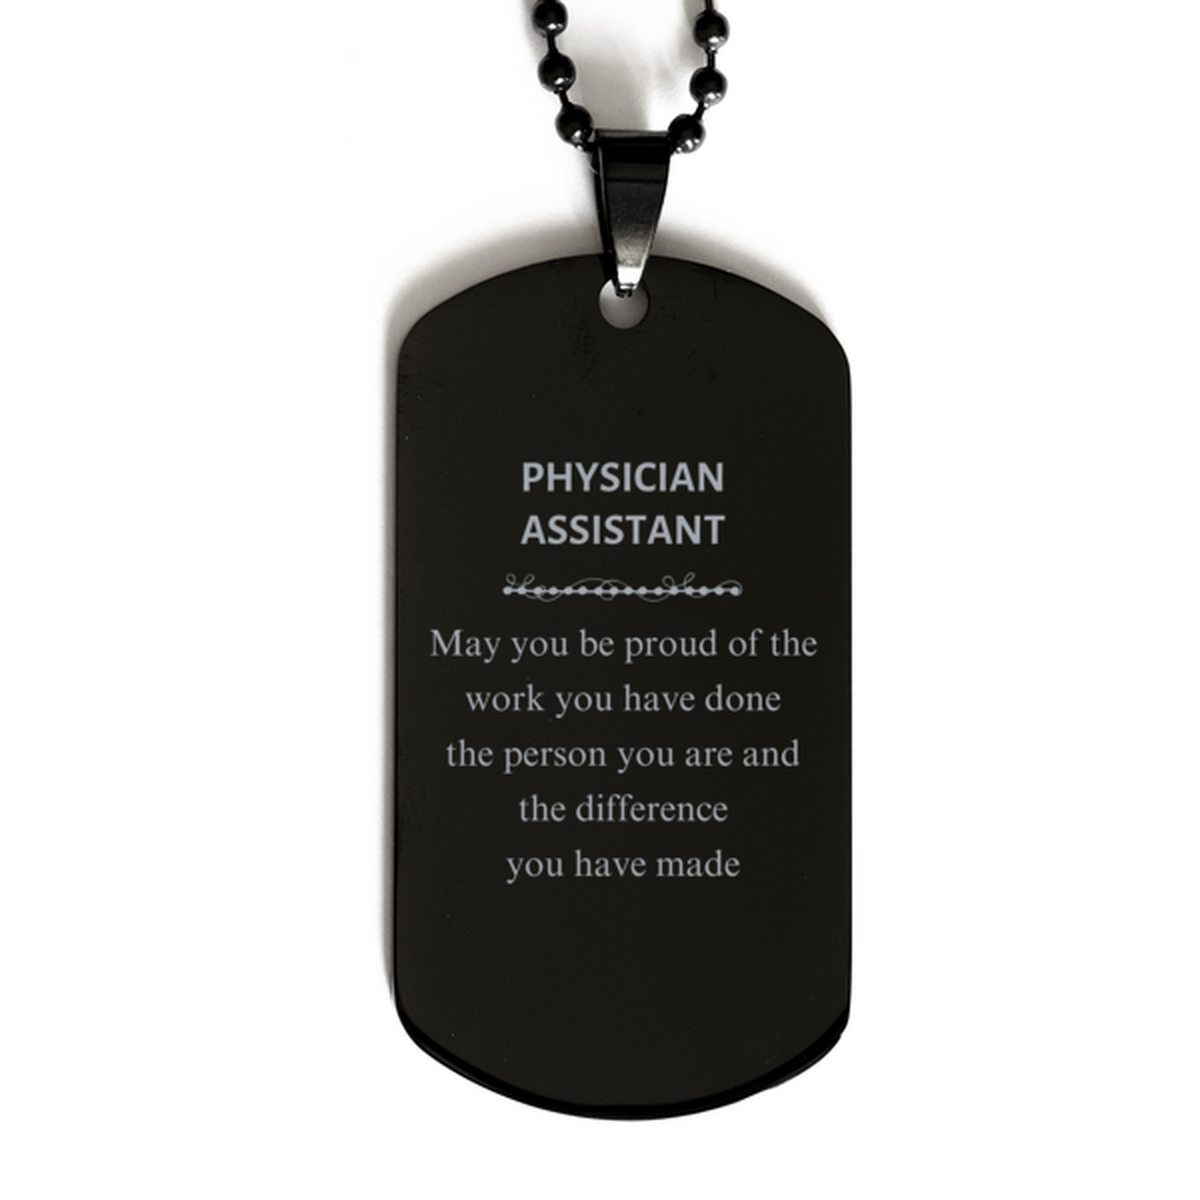 Physician Assistant May you be proud of the work you have done, Retirement Physician Assistant Black Dog Tag for Colleague Appreciation Gifts Amazing for Physician Assistant